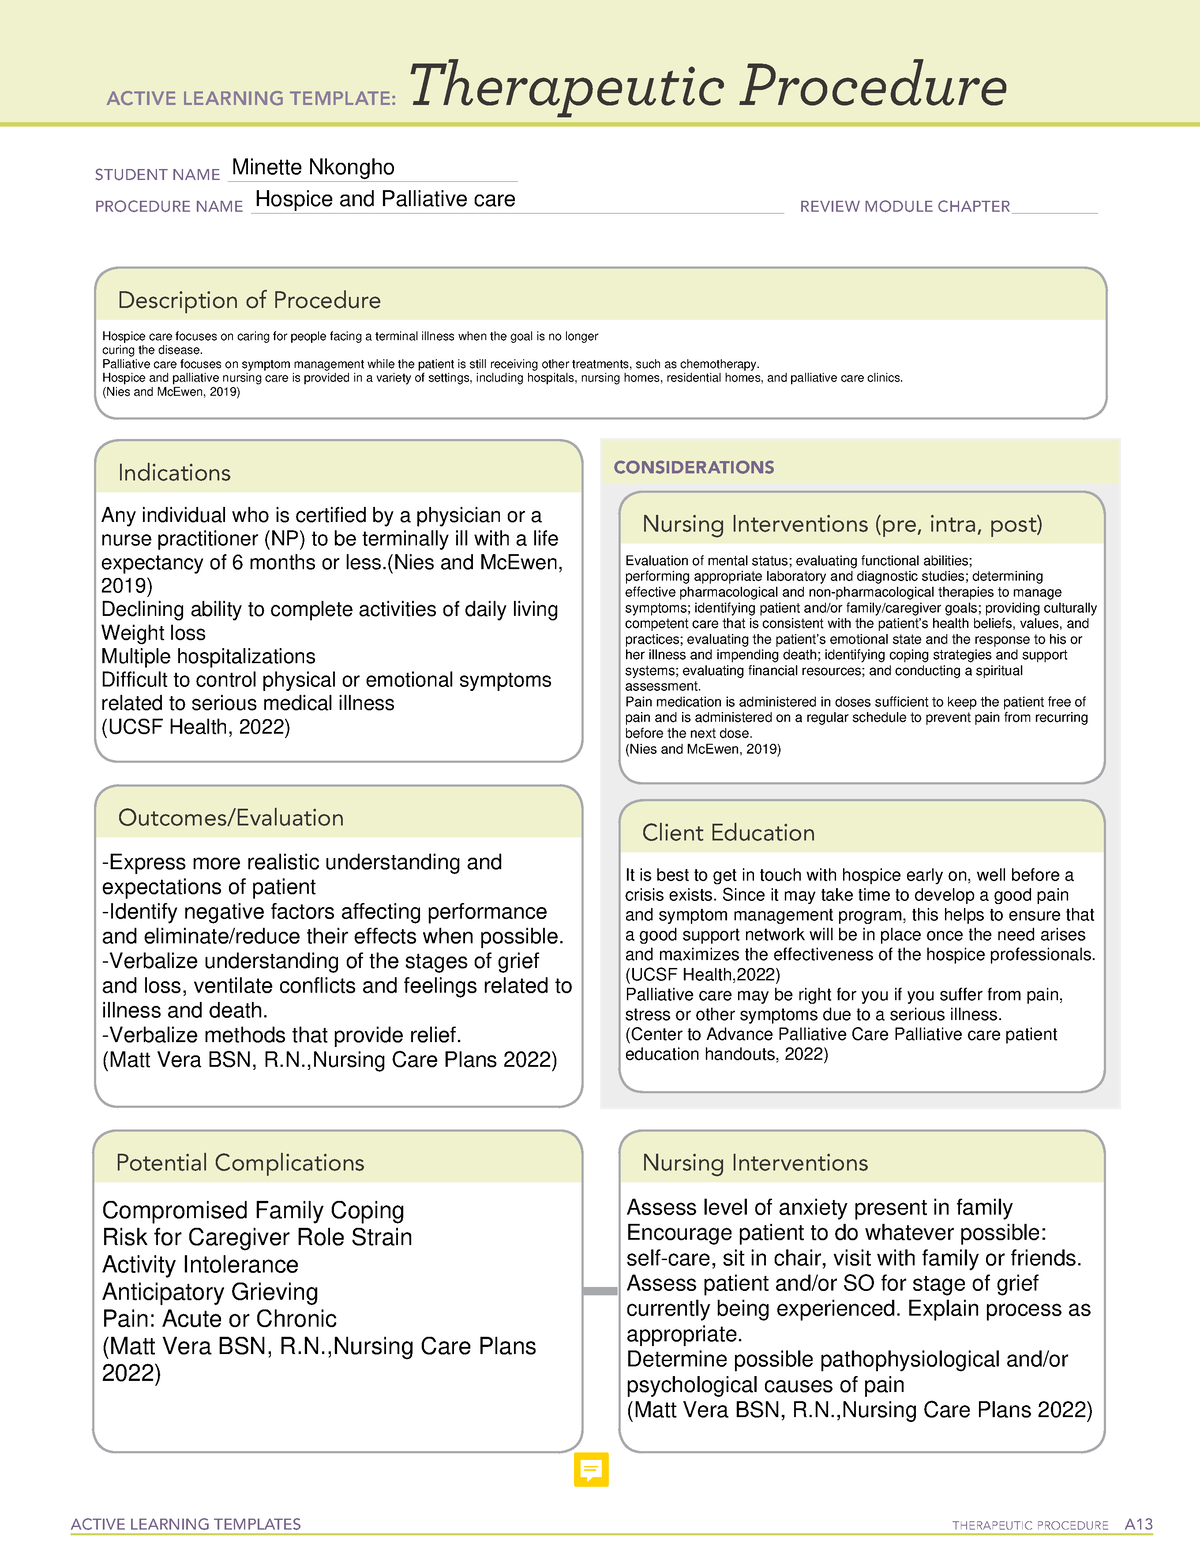 WK5 ALT Therapeutic Procedure ACTIVE LEARNING TEMPLATES THERAPEUTIC